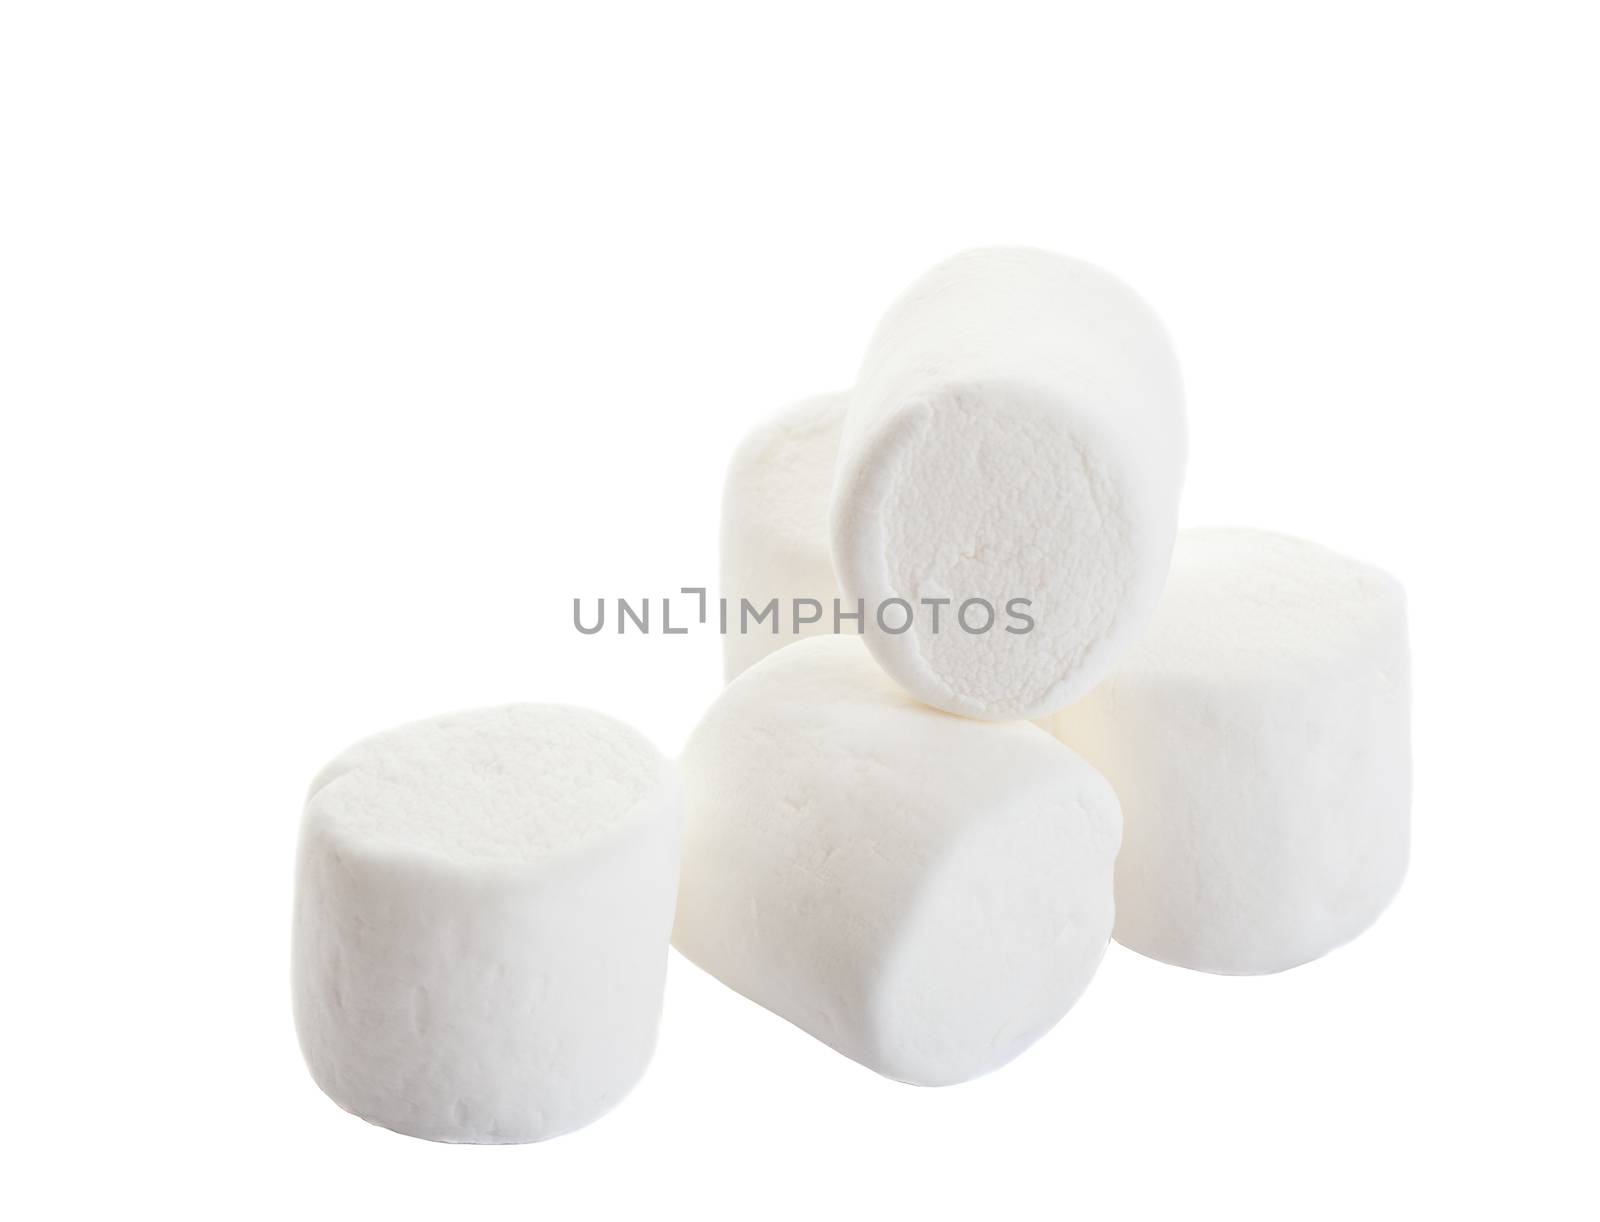 A pile of white puffy marshmallows.  Shot on white background.